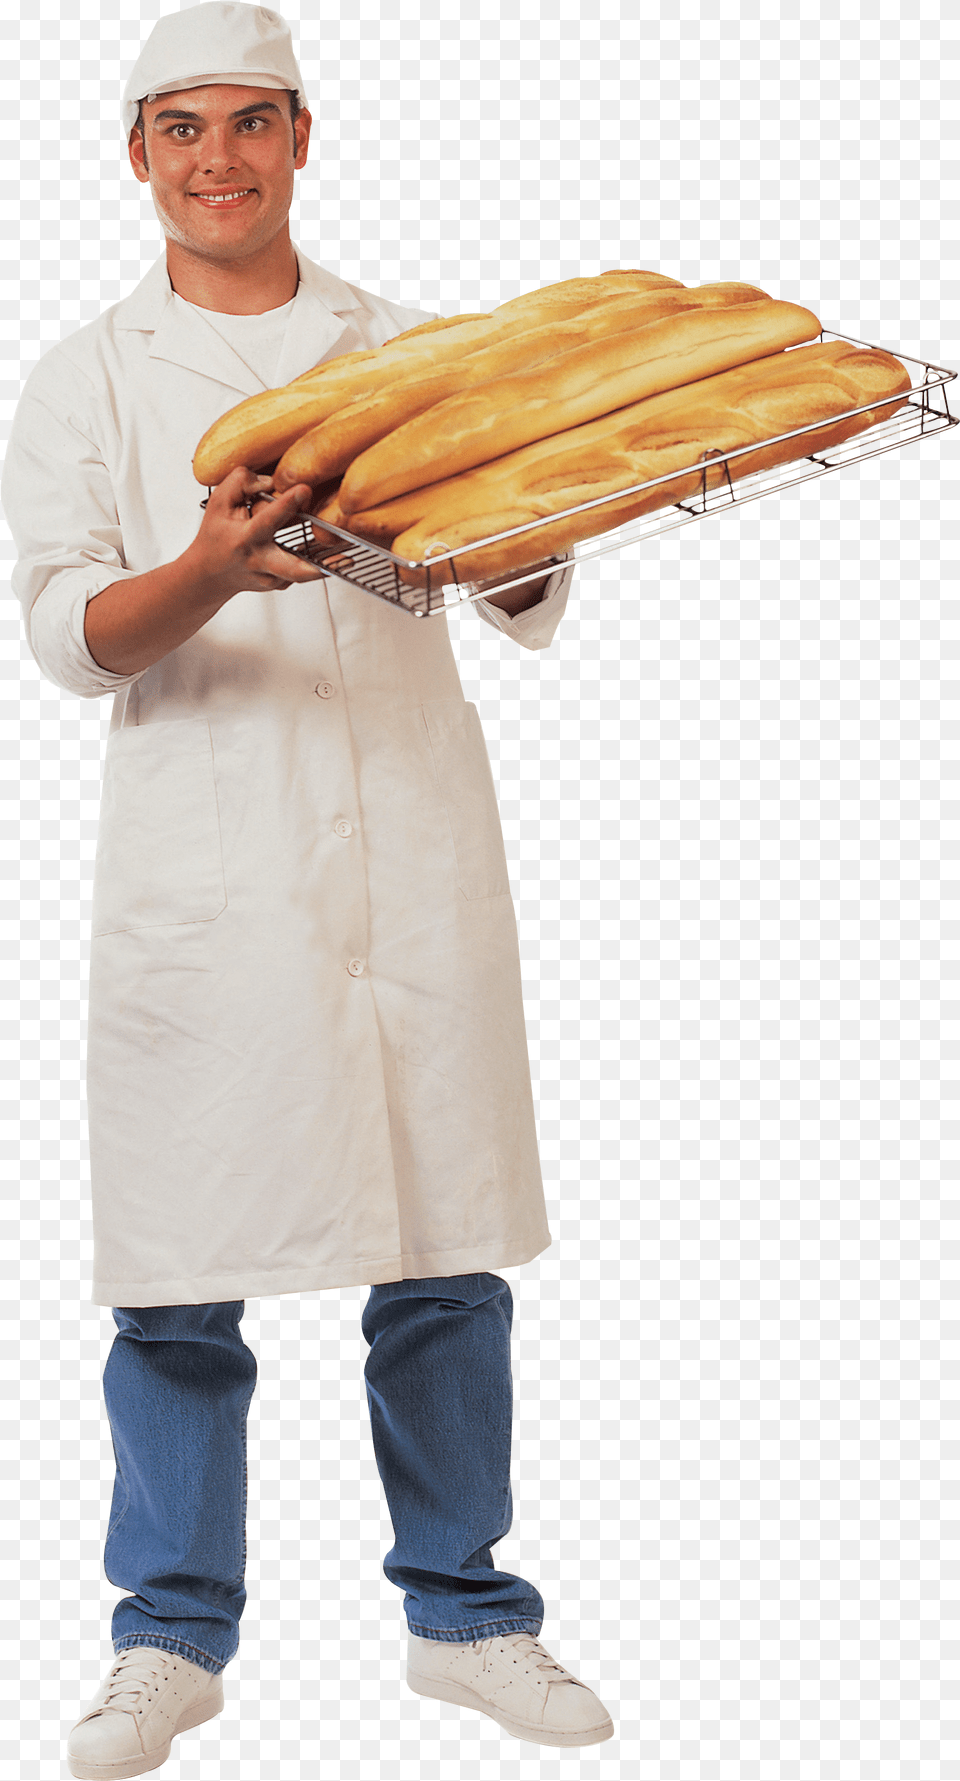 Chef Image Cook People, Bread, Food, Adult, Male Png